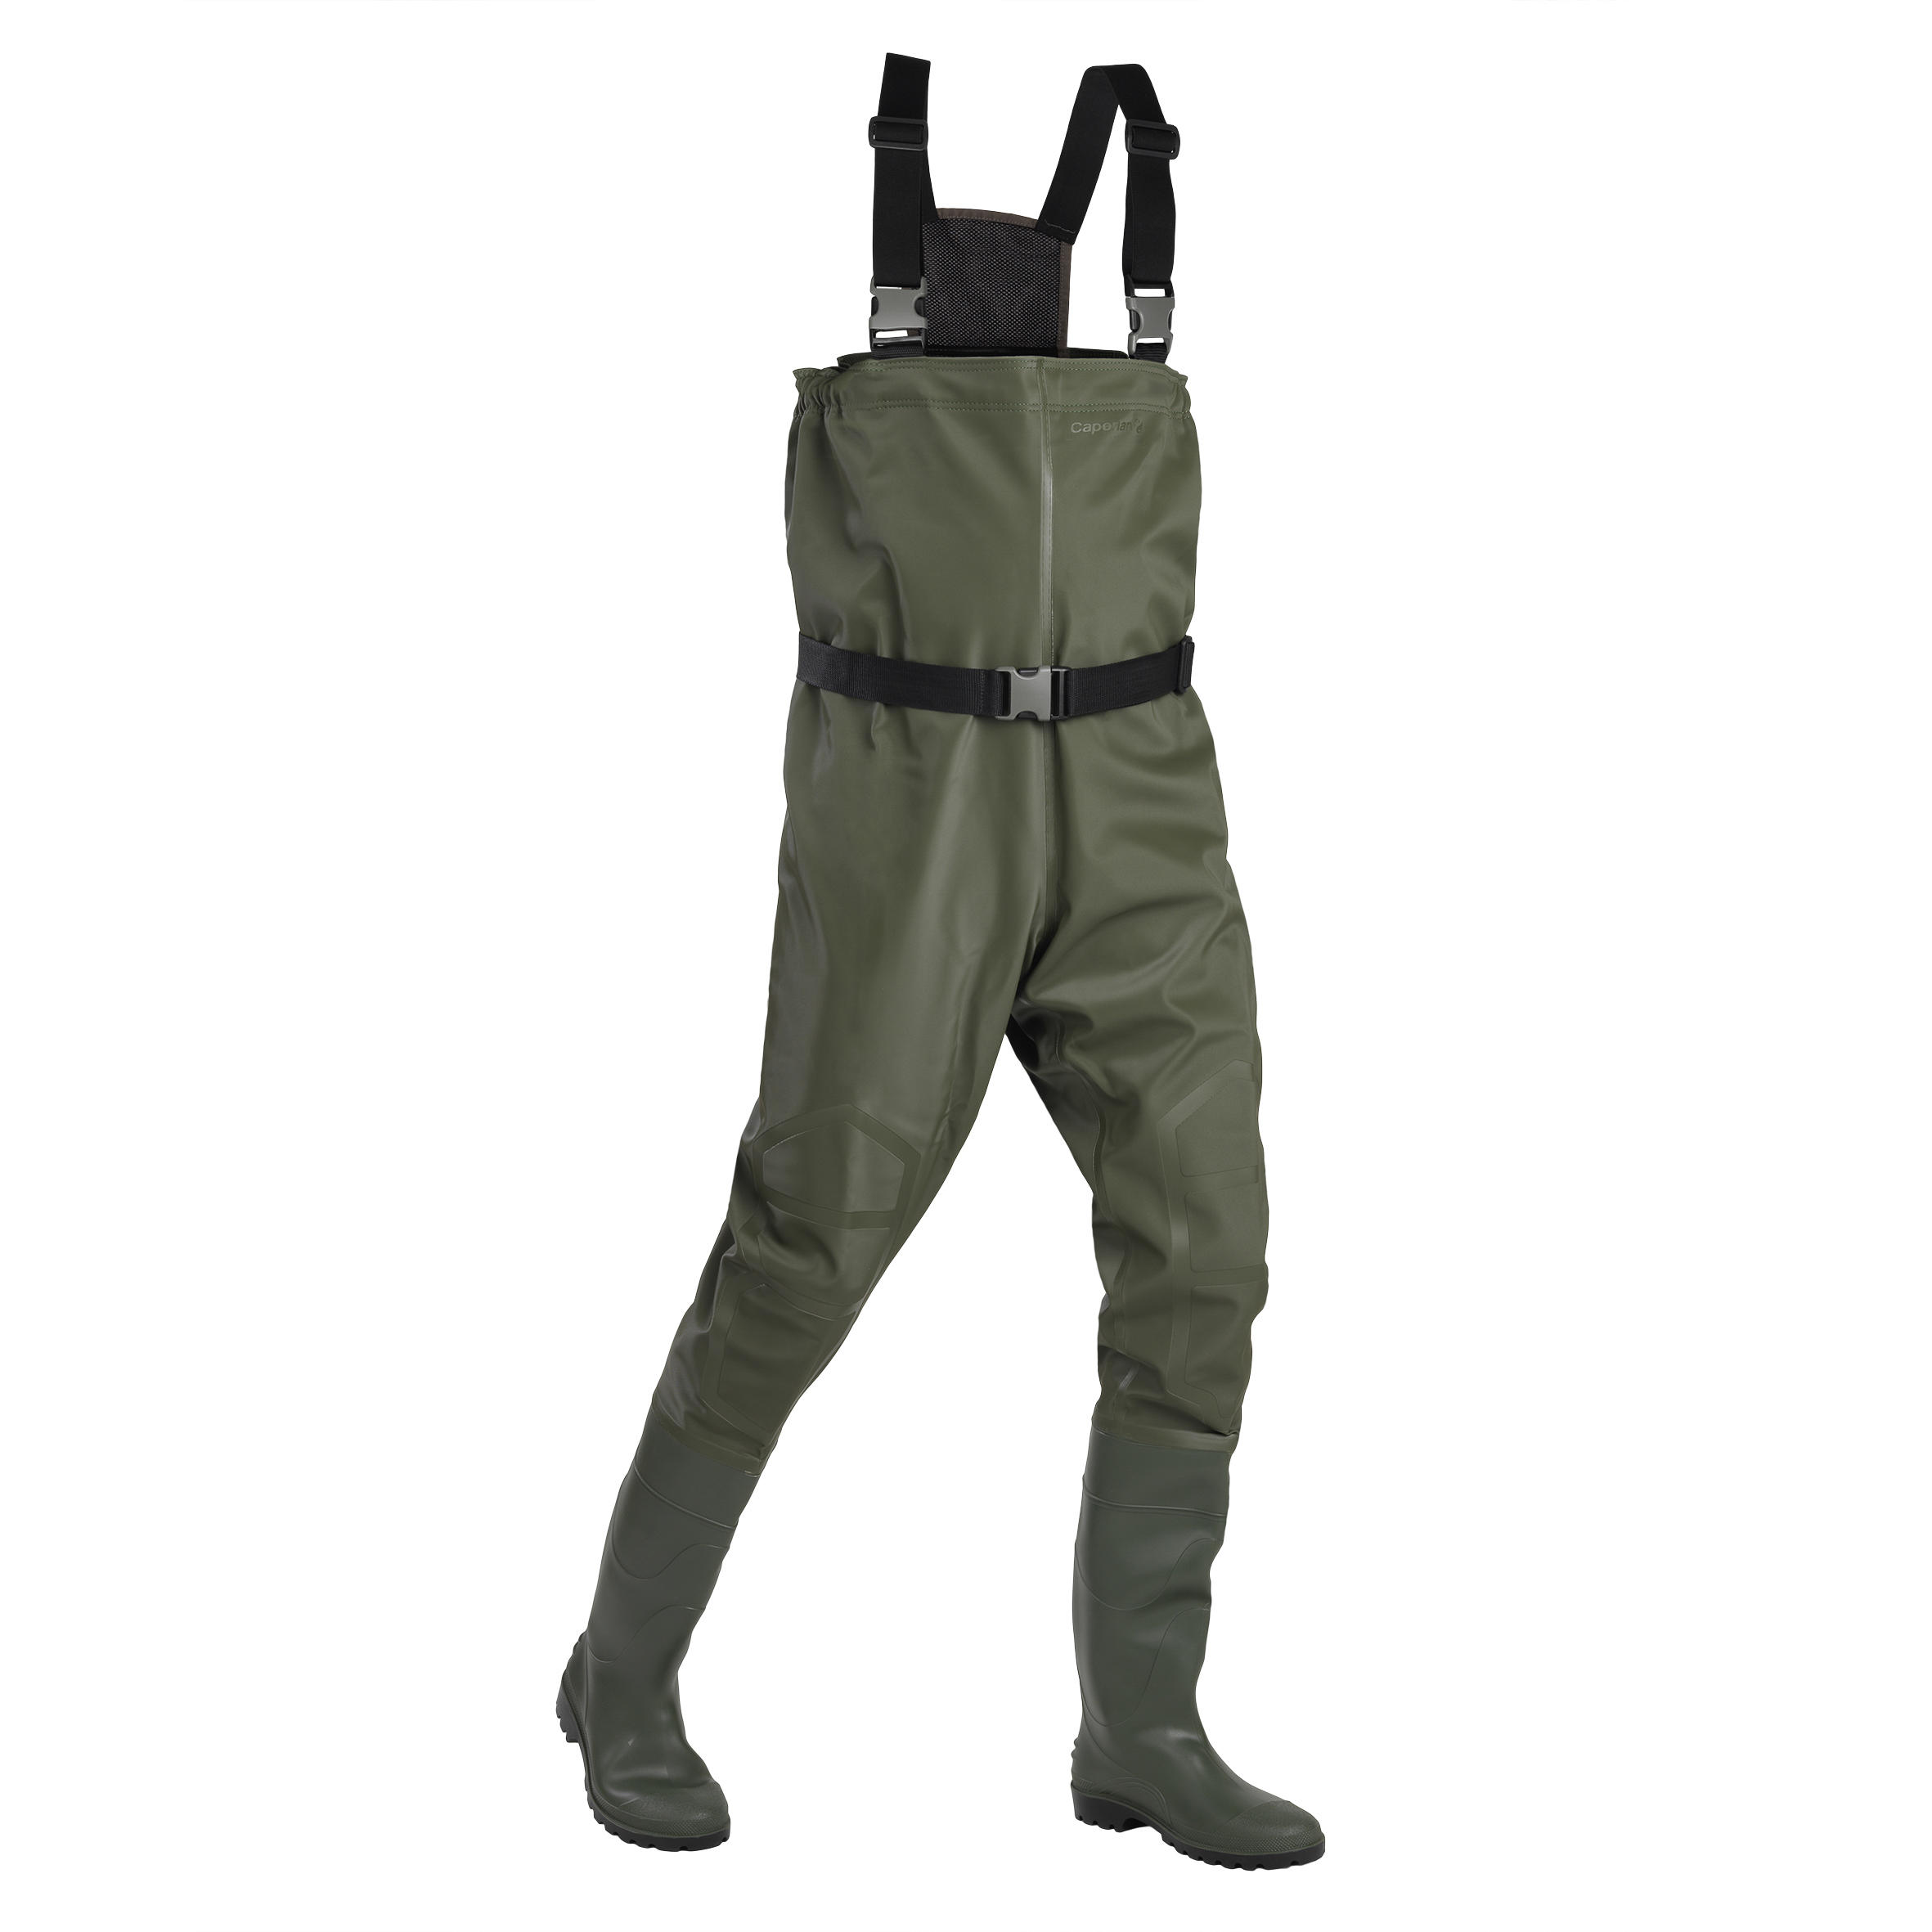 men's fishing waders with boots